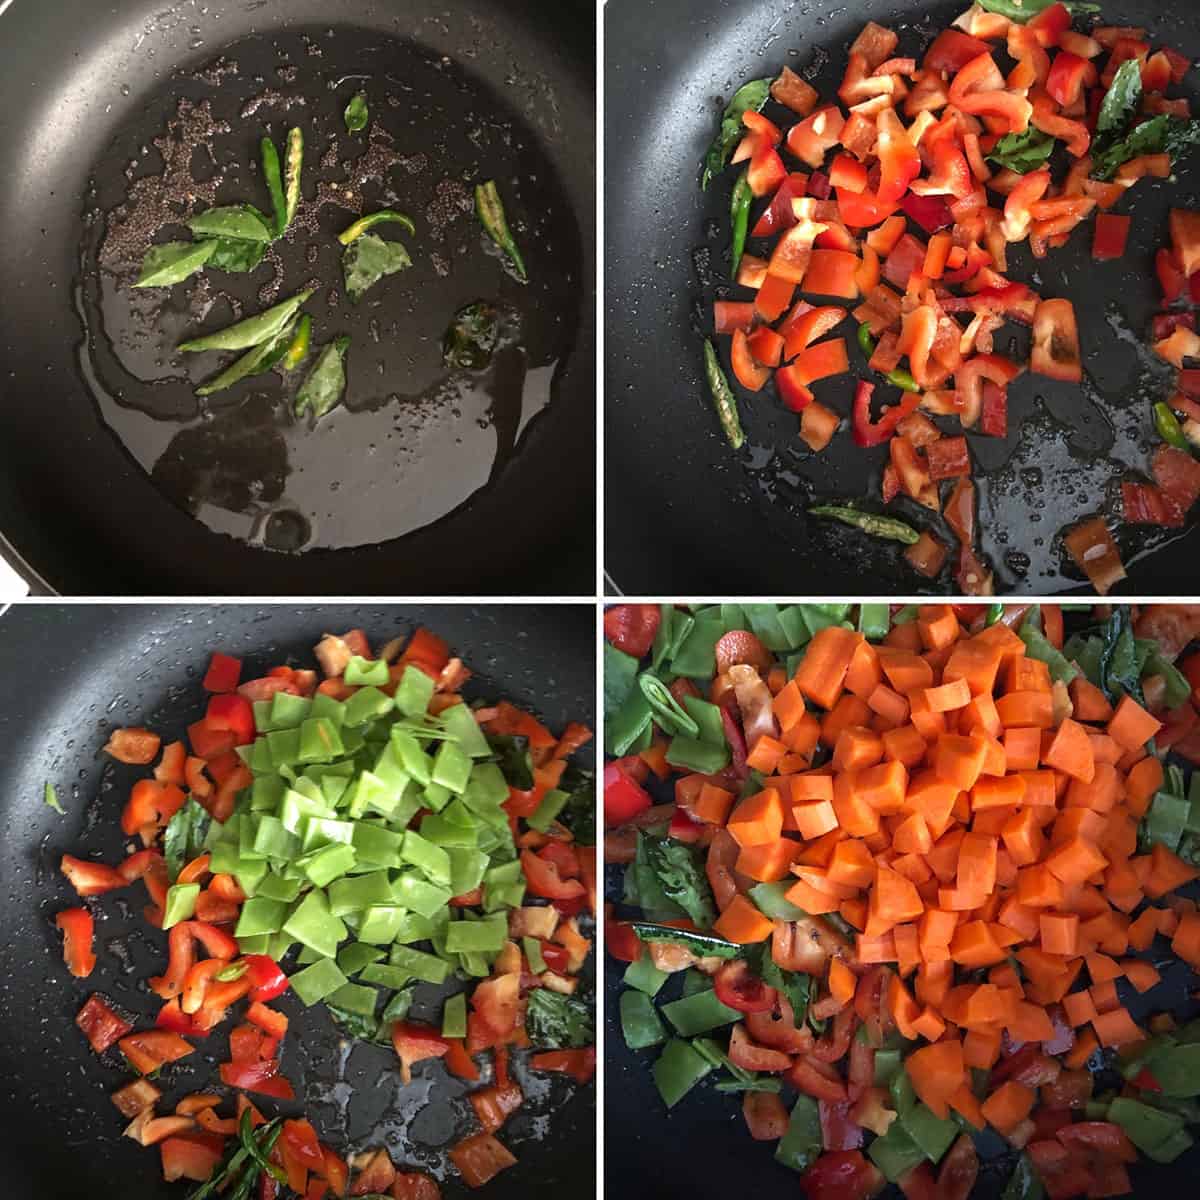 Side by side photos showing veggies being sauteed